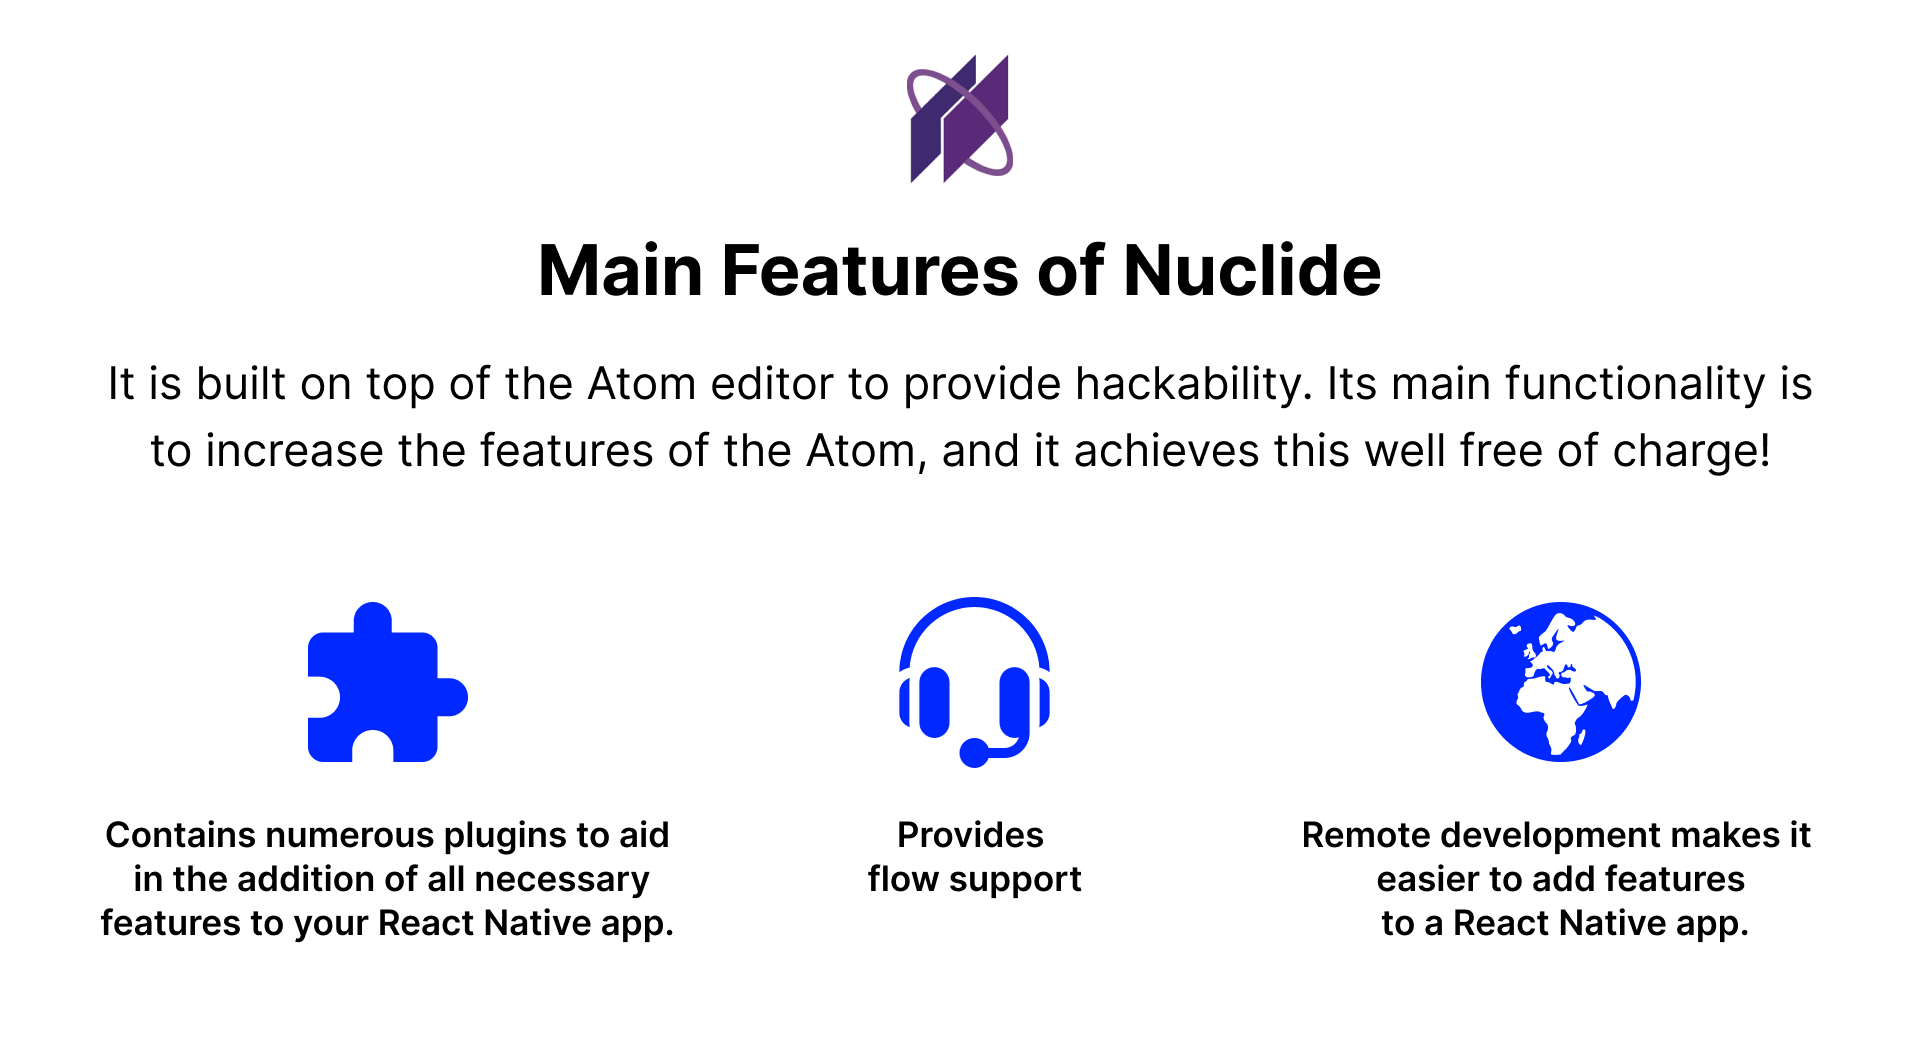 Main Features of Nuclide